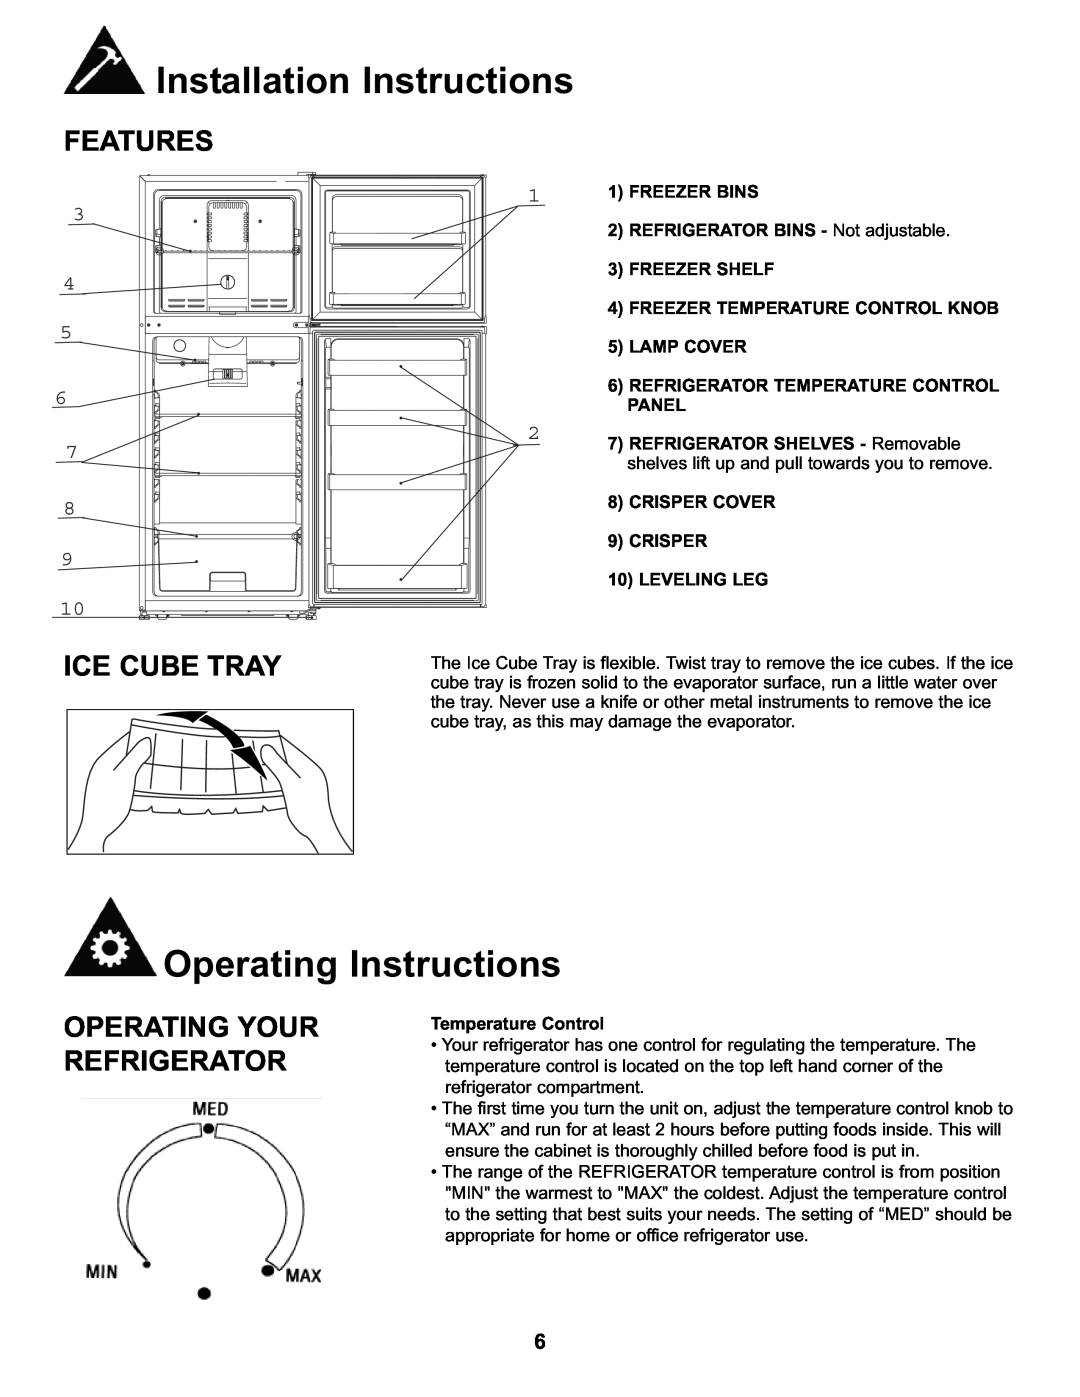 Danby DFF282SLDB manual Operating Instructions, Features, Ice Cube Tray, Operating Your Refrigerator, 5LAMP COVER 